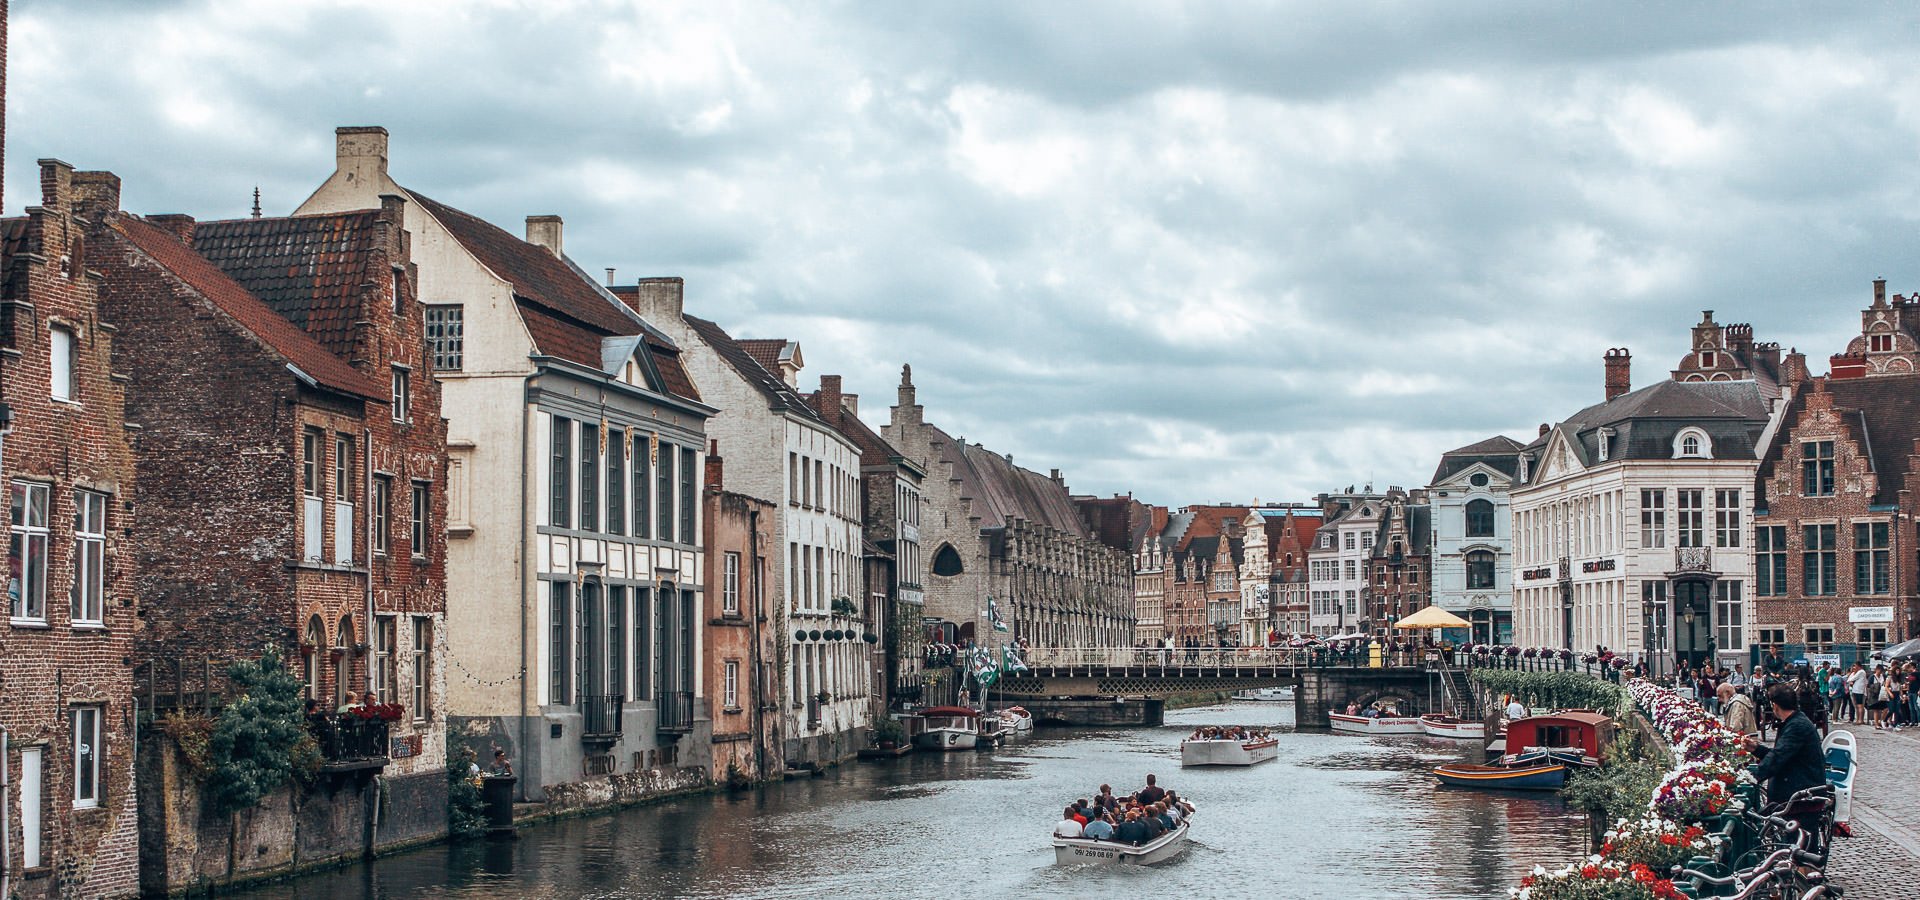 The Undiscovered Flemish Jewel: A Day Trip To Ghent | brunch in london 4